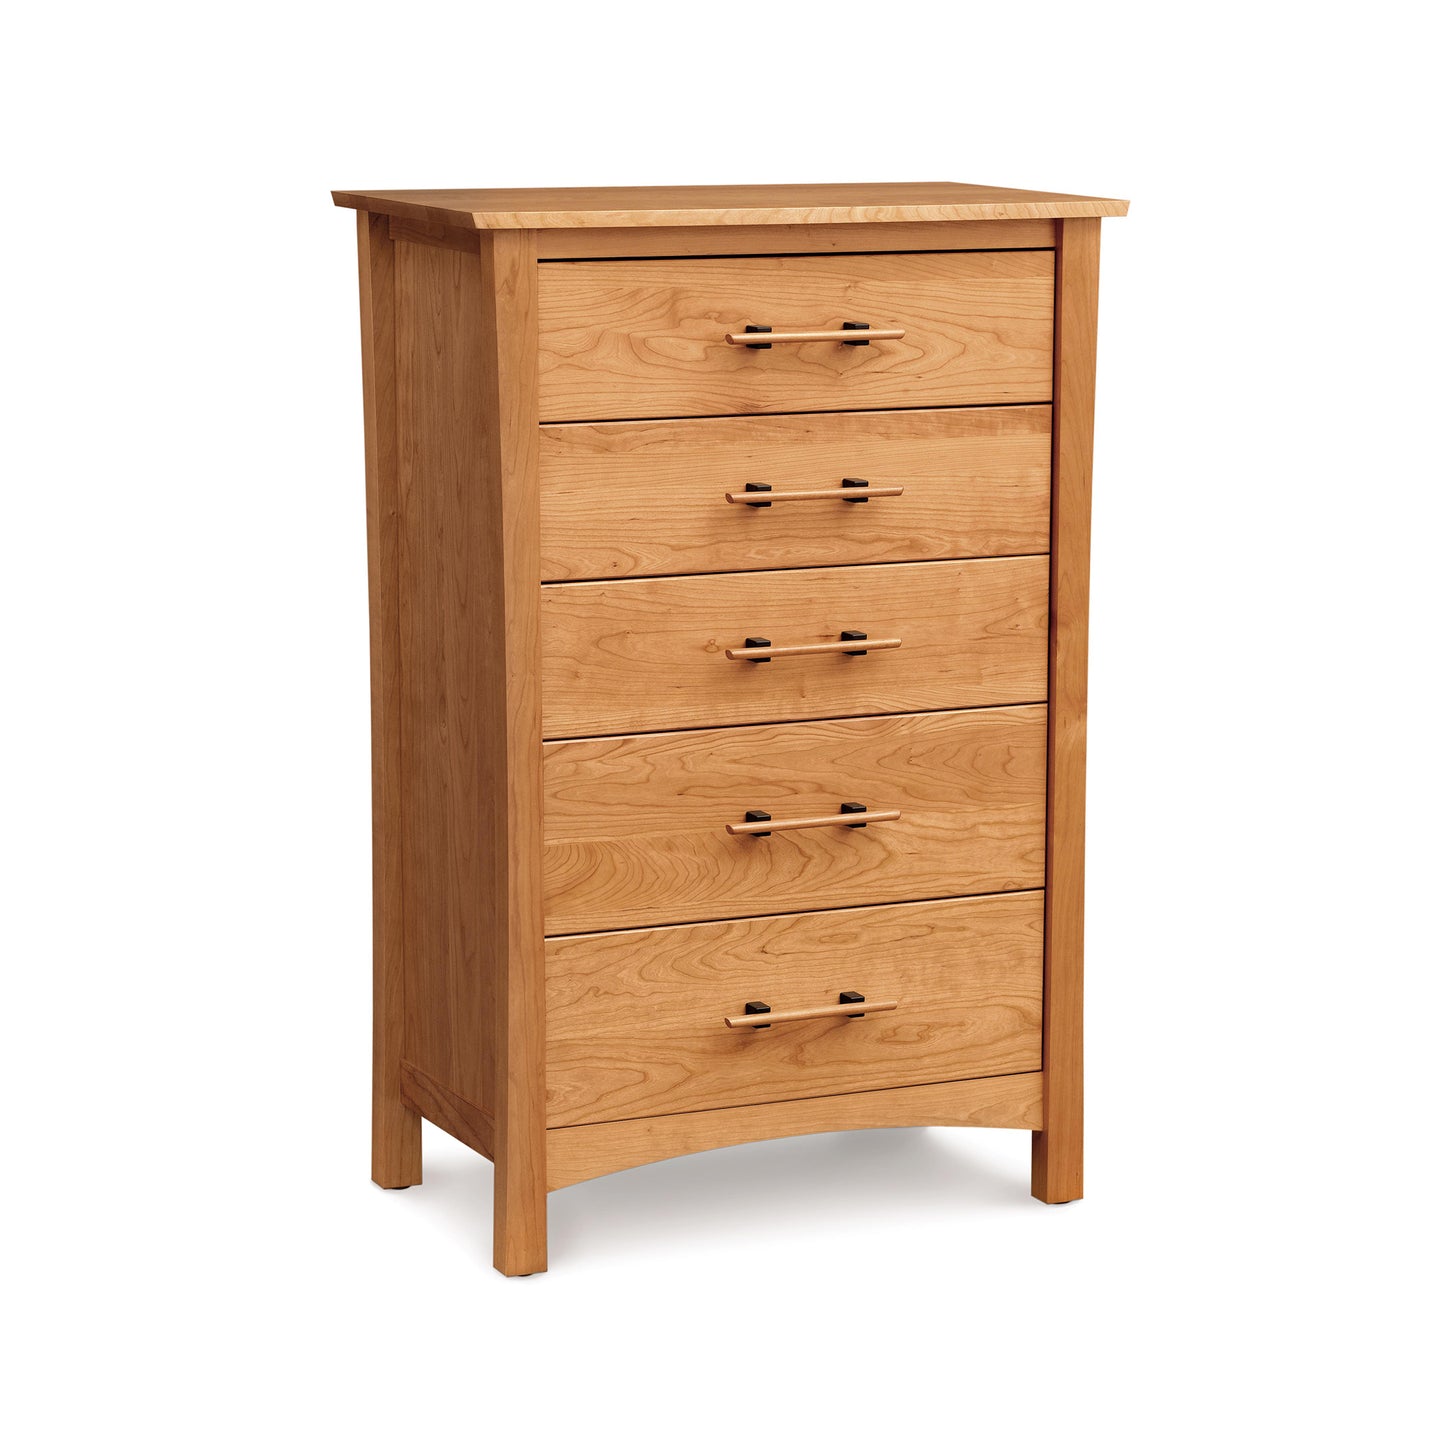 A Monterey 5-Drawer Chest by Copeland Furniture on a white background.